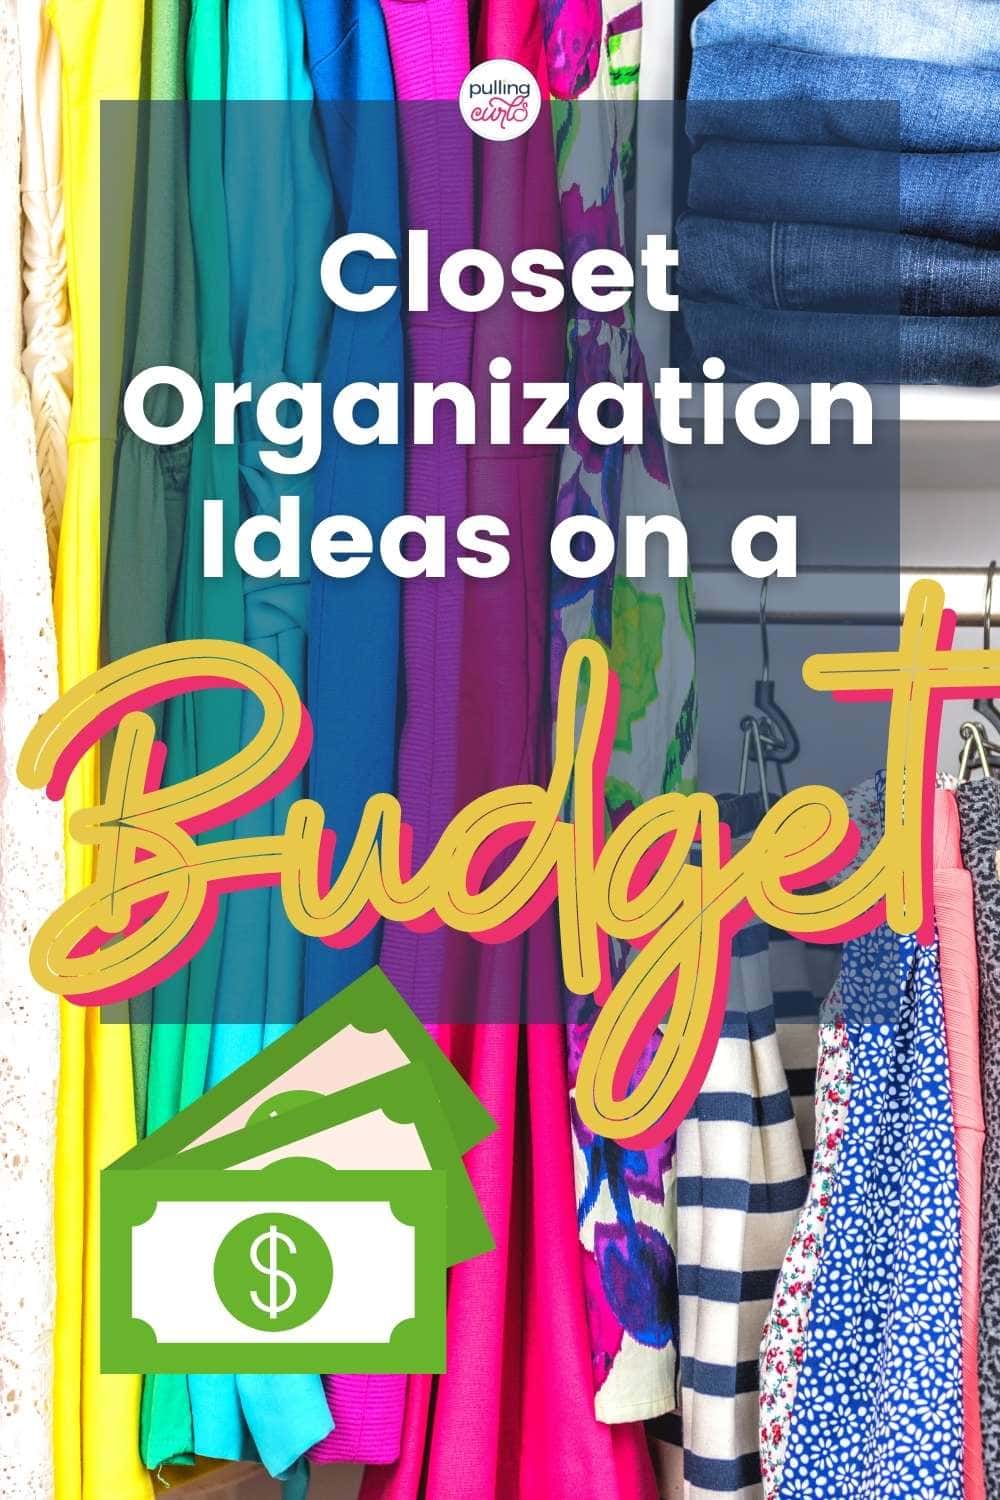 Closet space often comes at a premium, so being able to use it efficiently is a big won.  This article has lots of great ideas and easy diy closet organization ideas to maximize your small space. via @pullingcurls